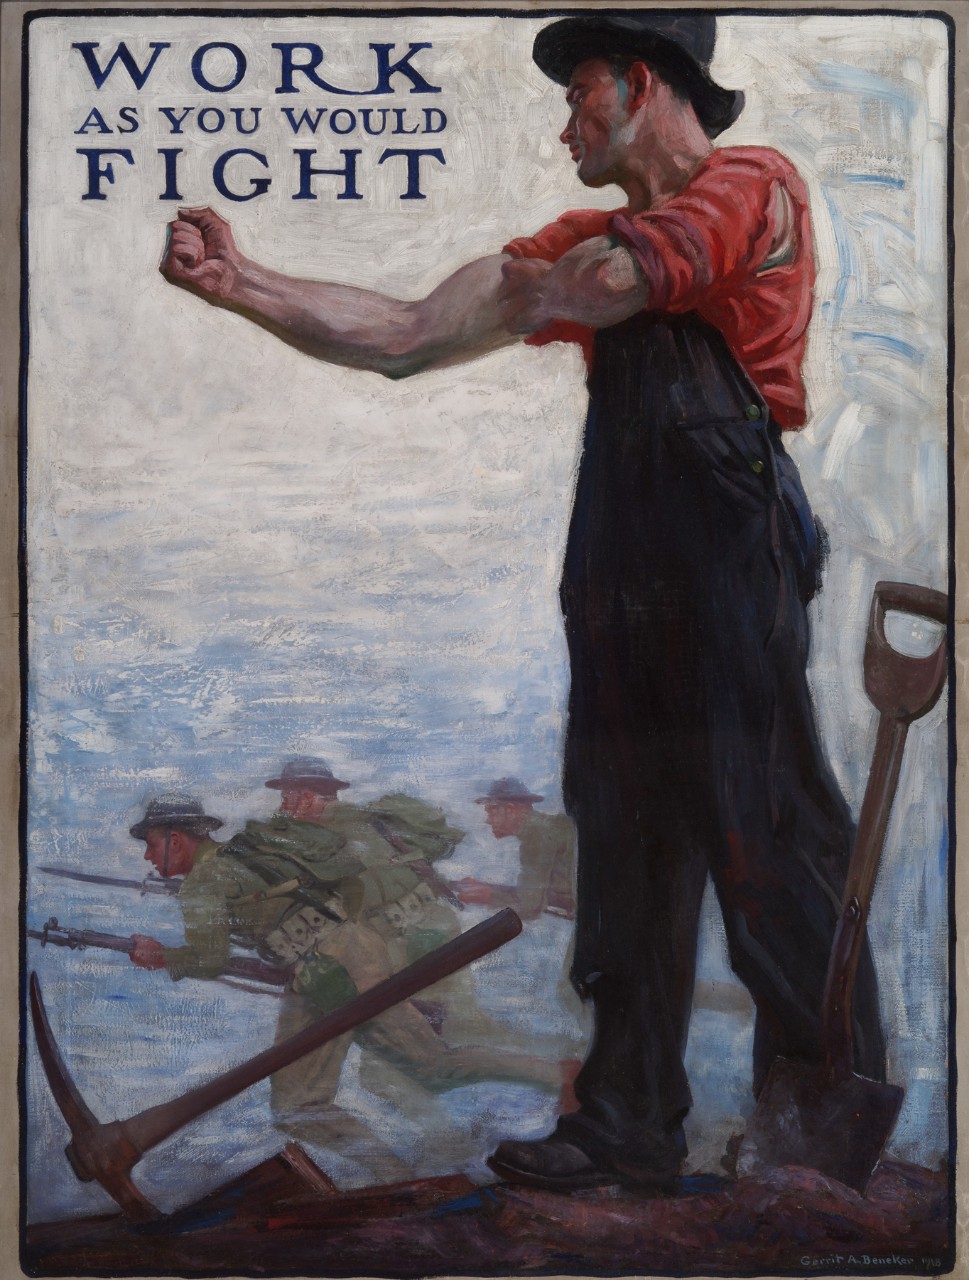 A workman flexes his arm while in the background soldiers charge forward. In the upper left it says “Work as You Would Fight”